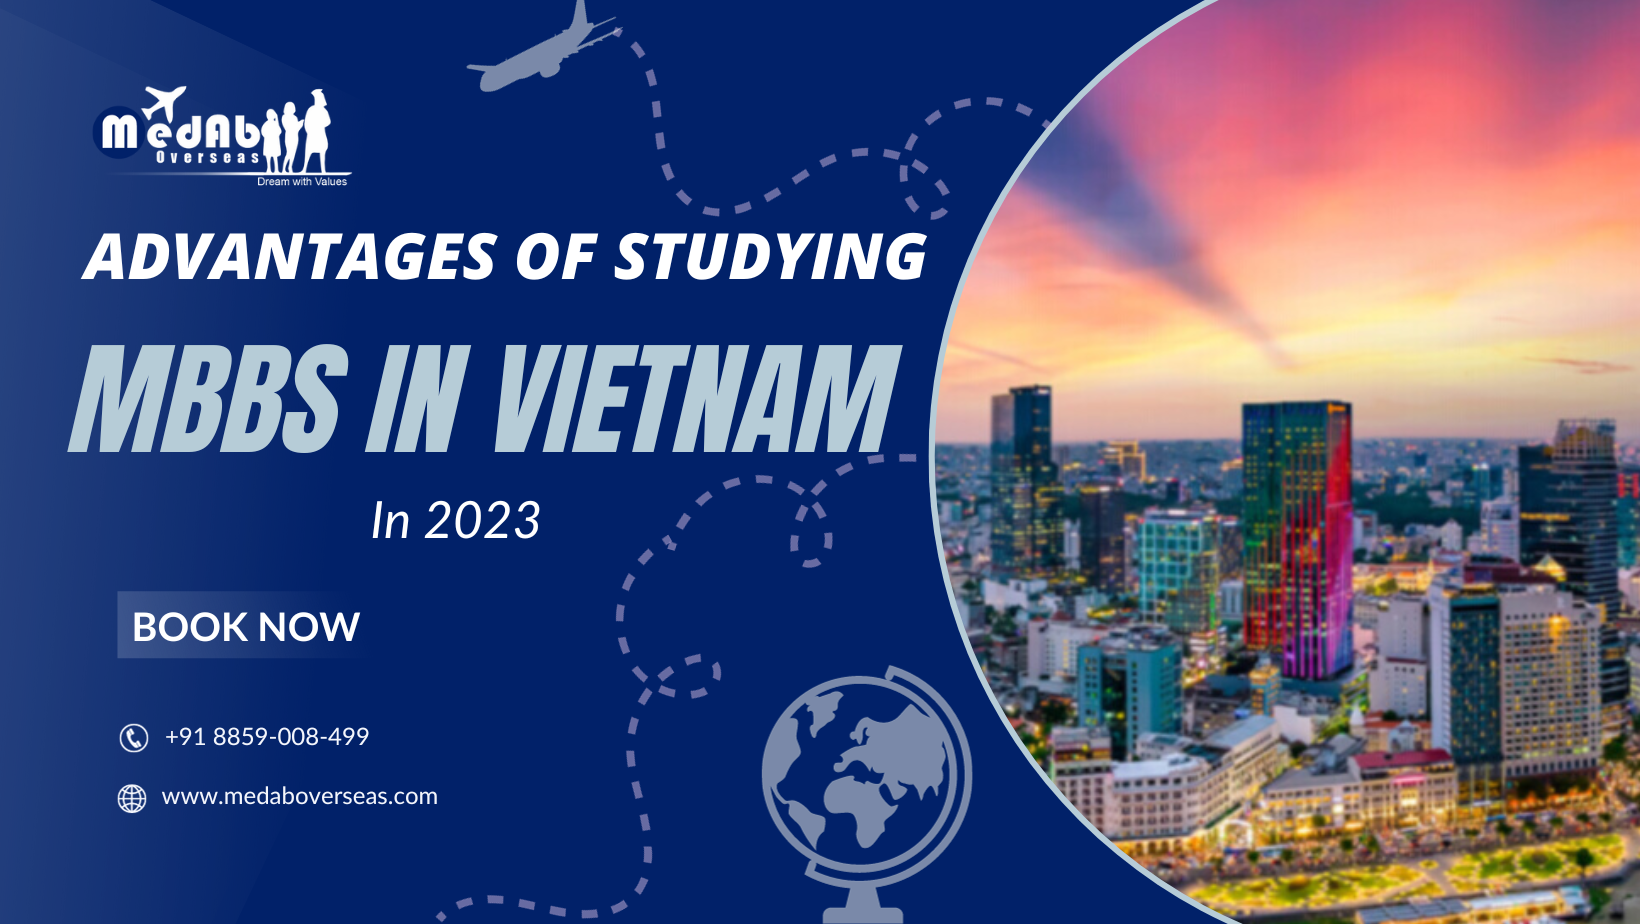 Advantages Of Studying MBBS In Vietnam